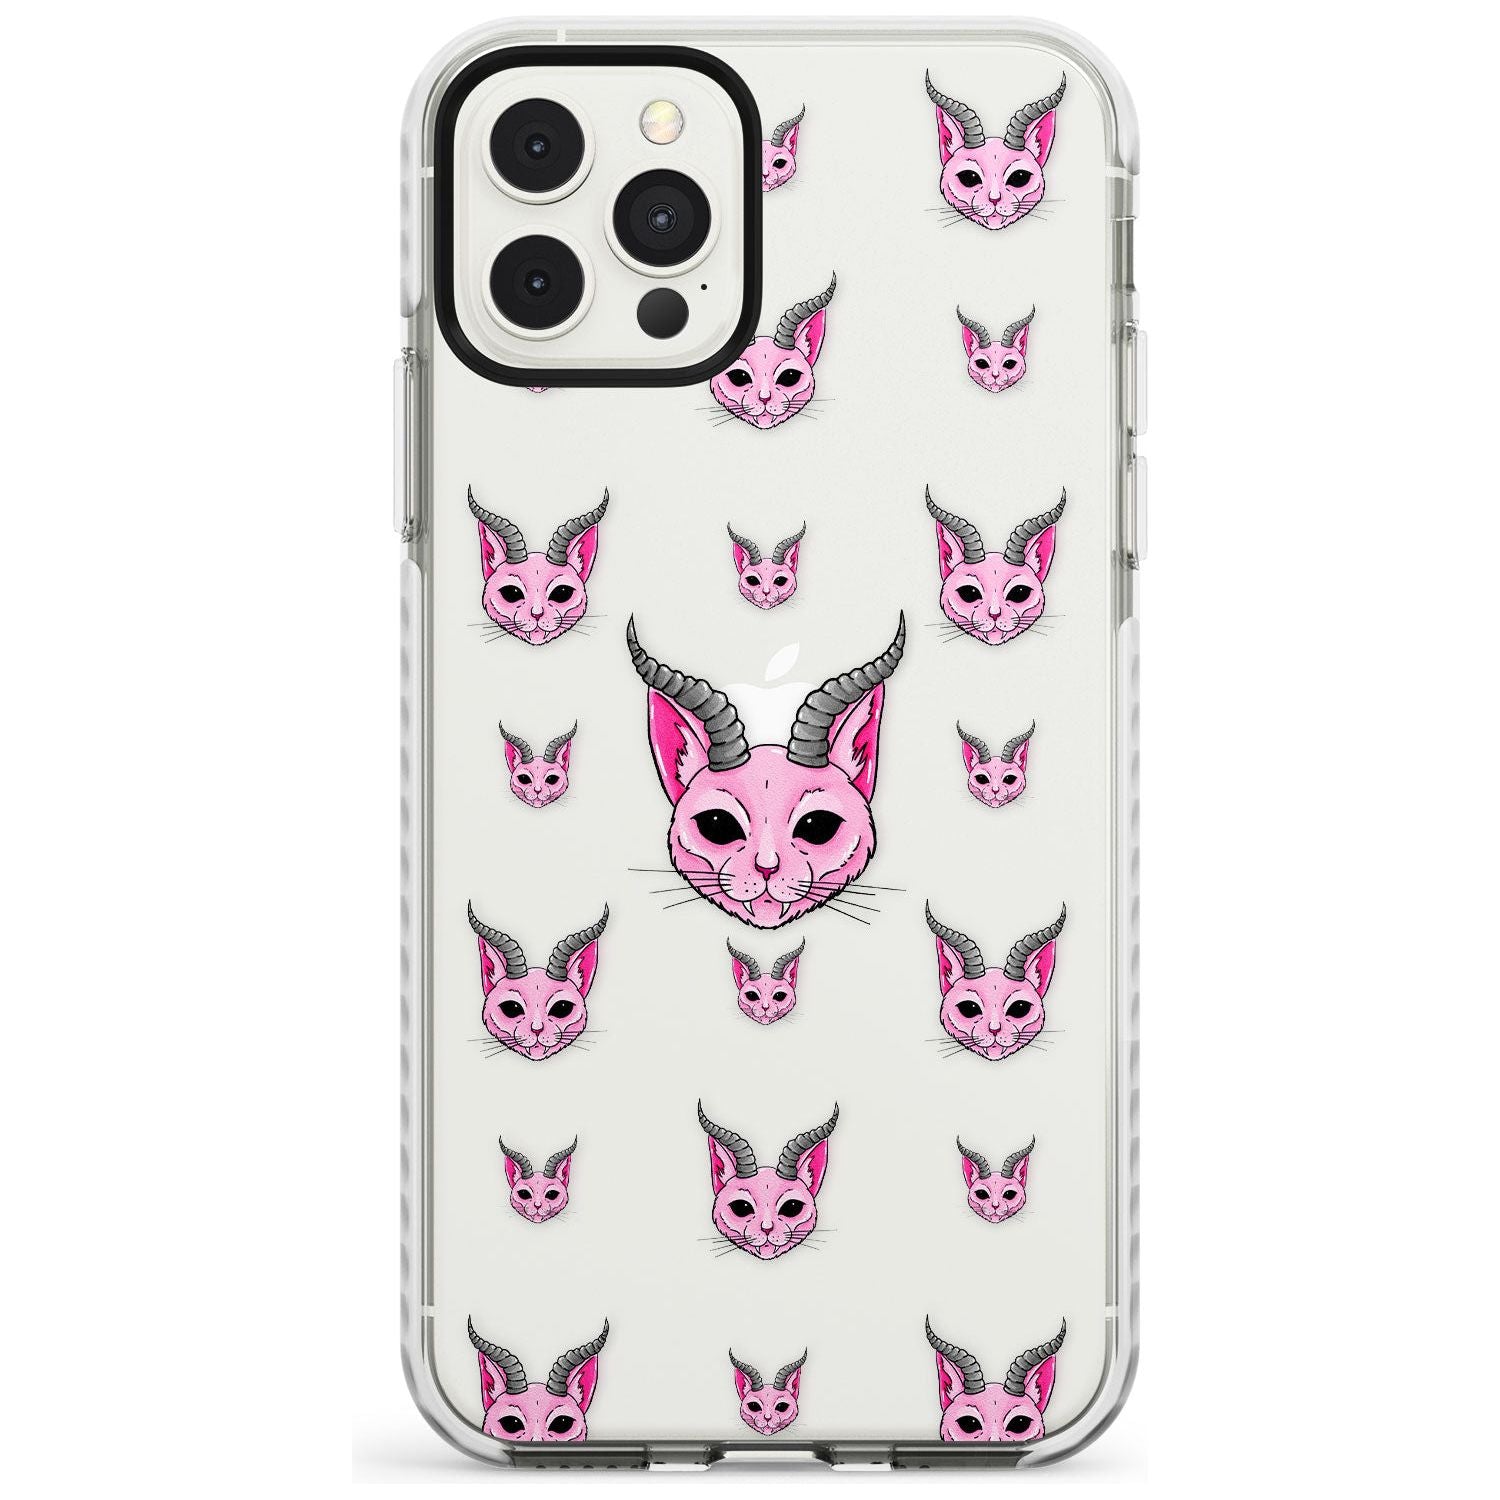 Demon Cat Pattern Impact Phone Case for iPhone 11 Pro Max